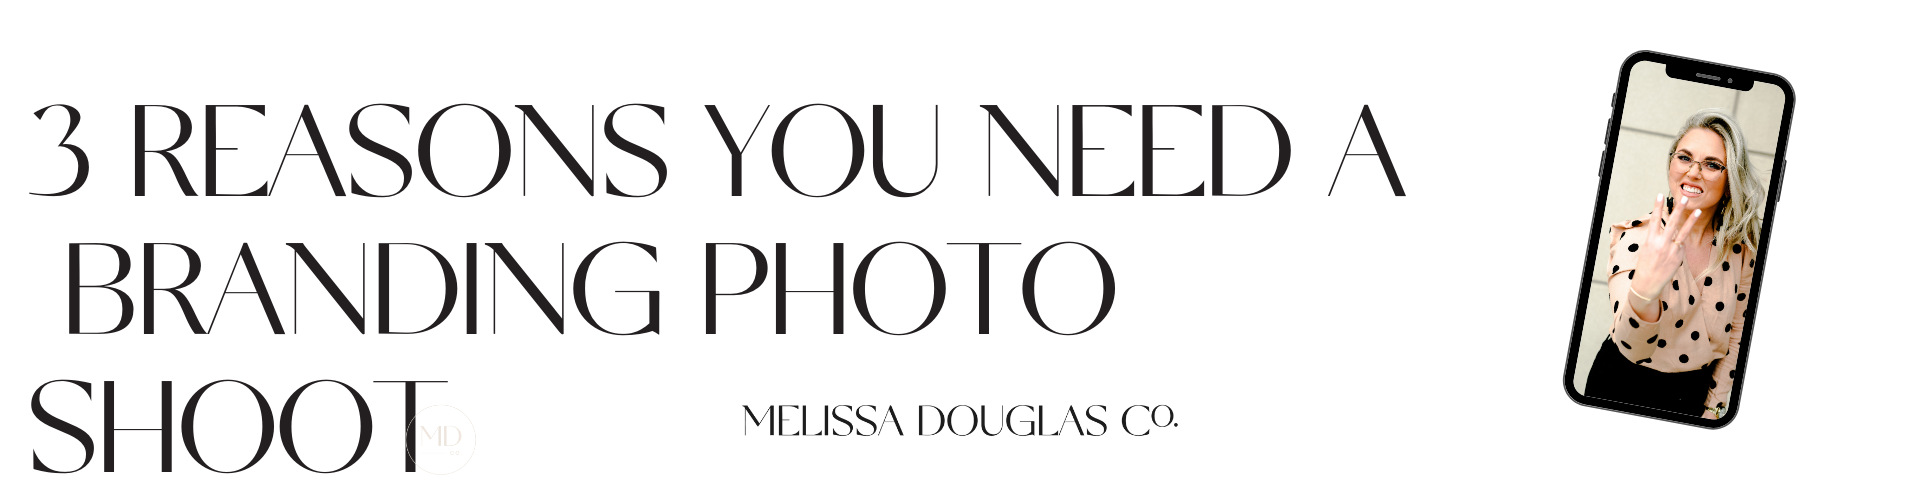 Top 3 Reasons You Need a Personal Branding Photoshoot .png